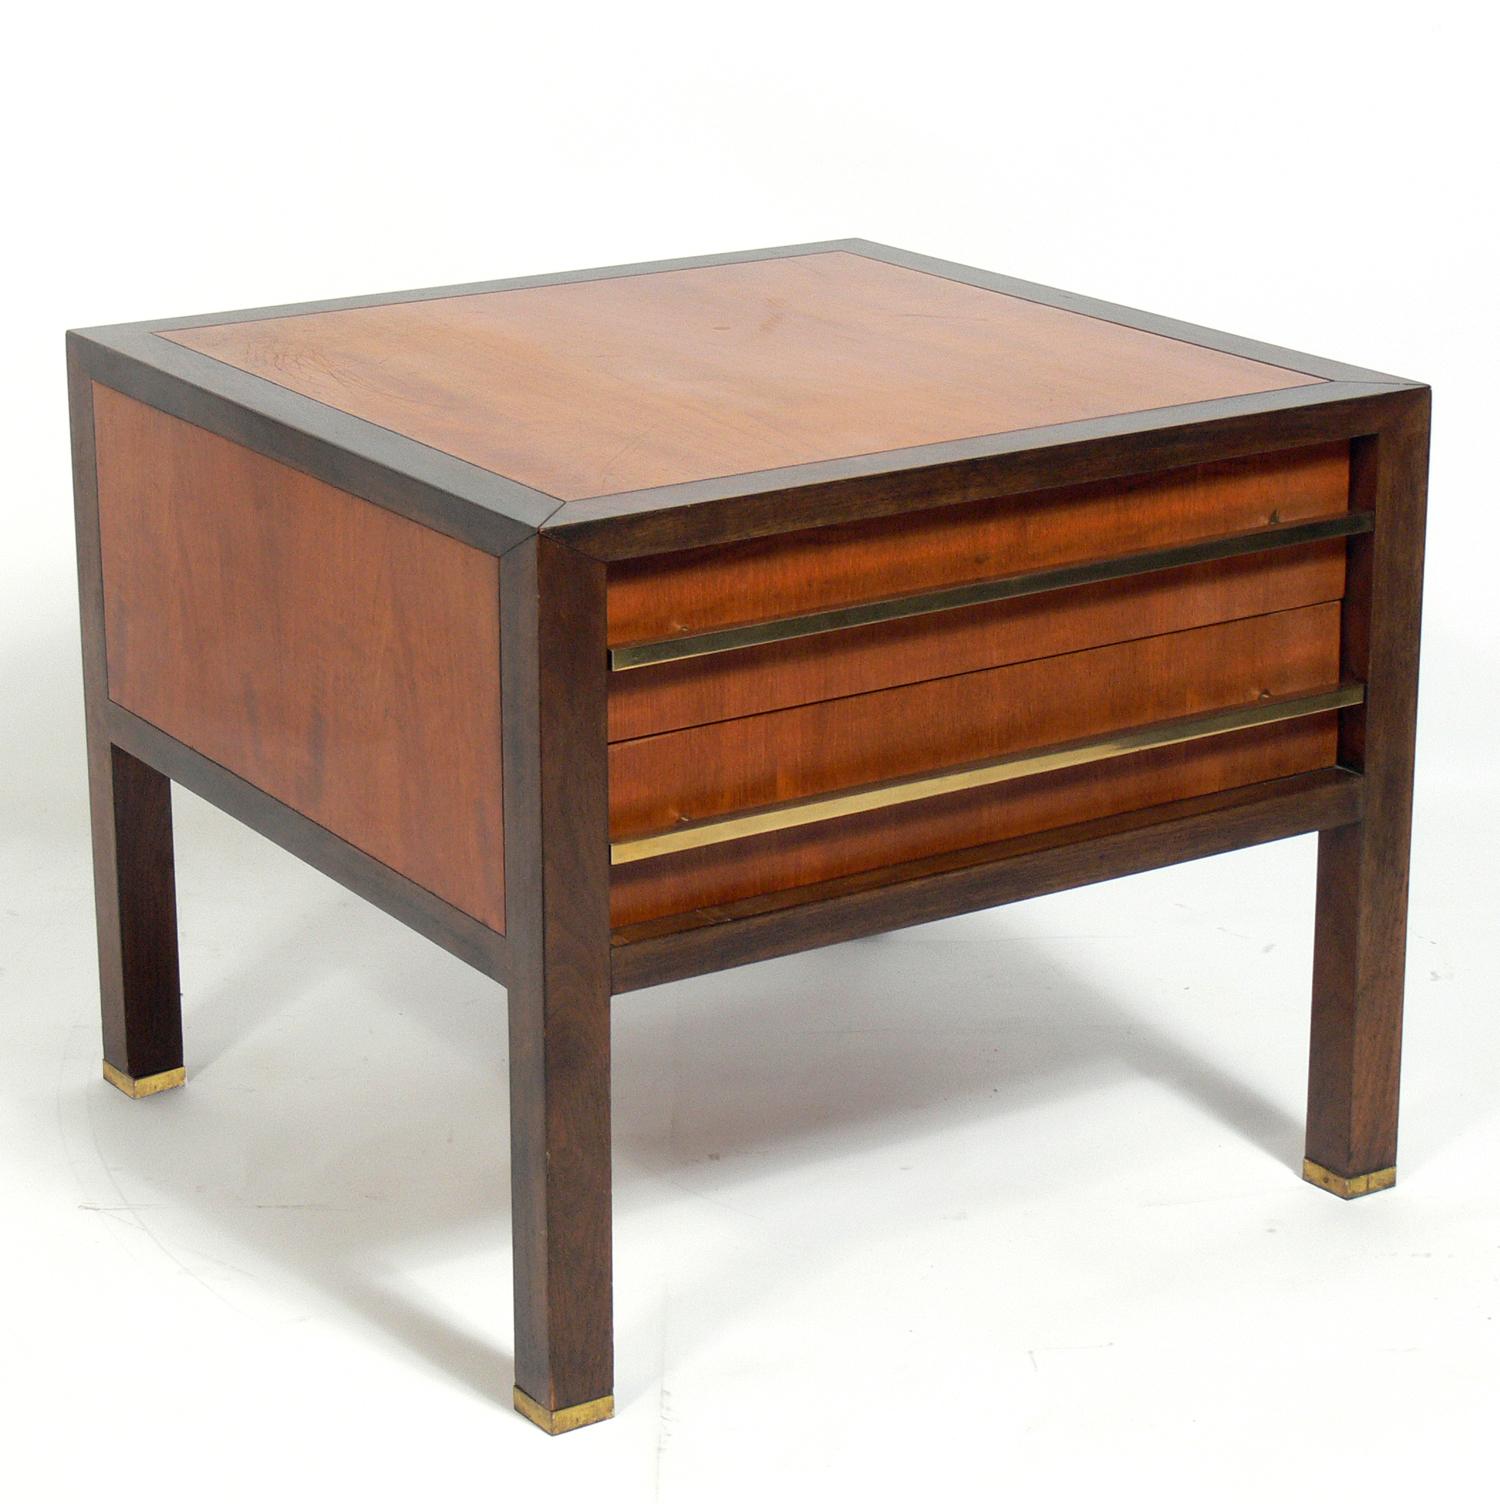 Clean lined walnut and brass nightstand or end table, designed by Michael Taylor for Baker, American, circa 1960s. It is a versatile size and can be used as a nightstand or side or end table.